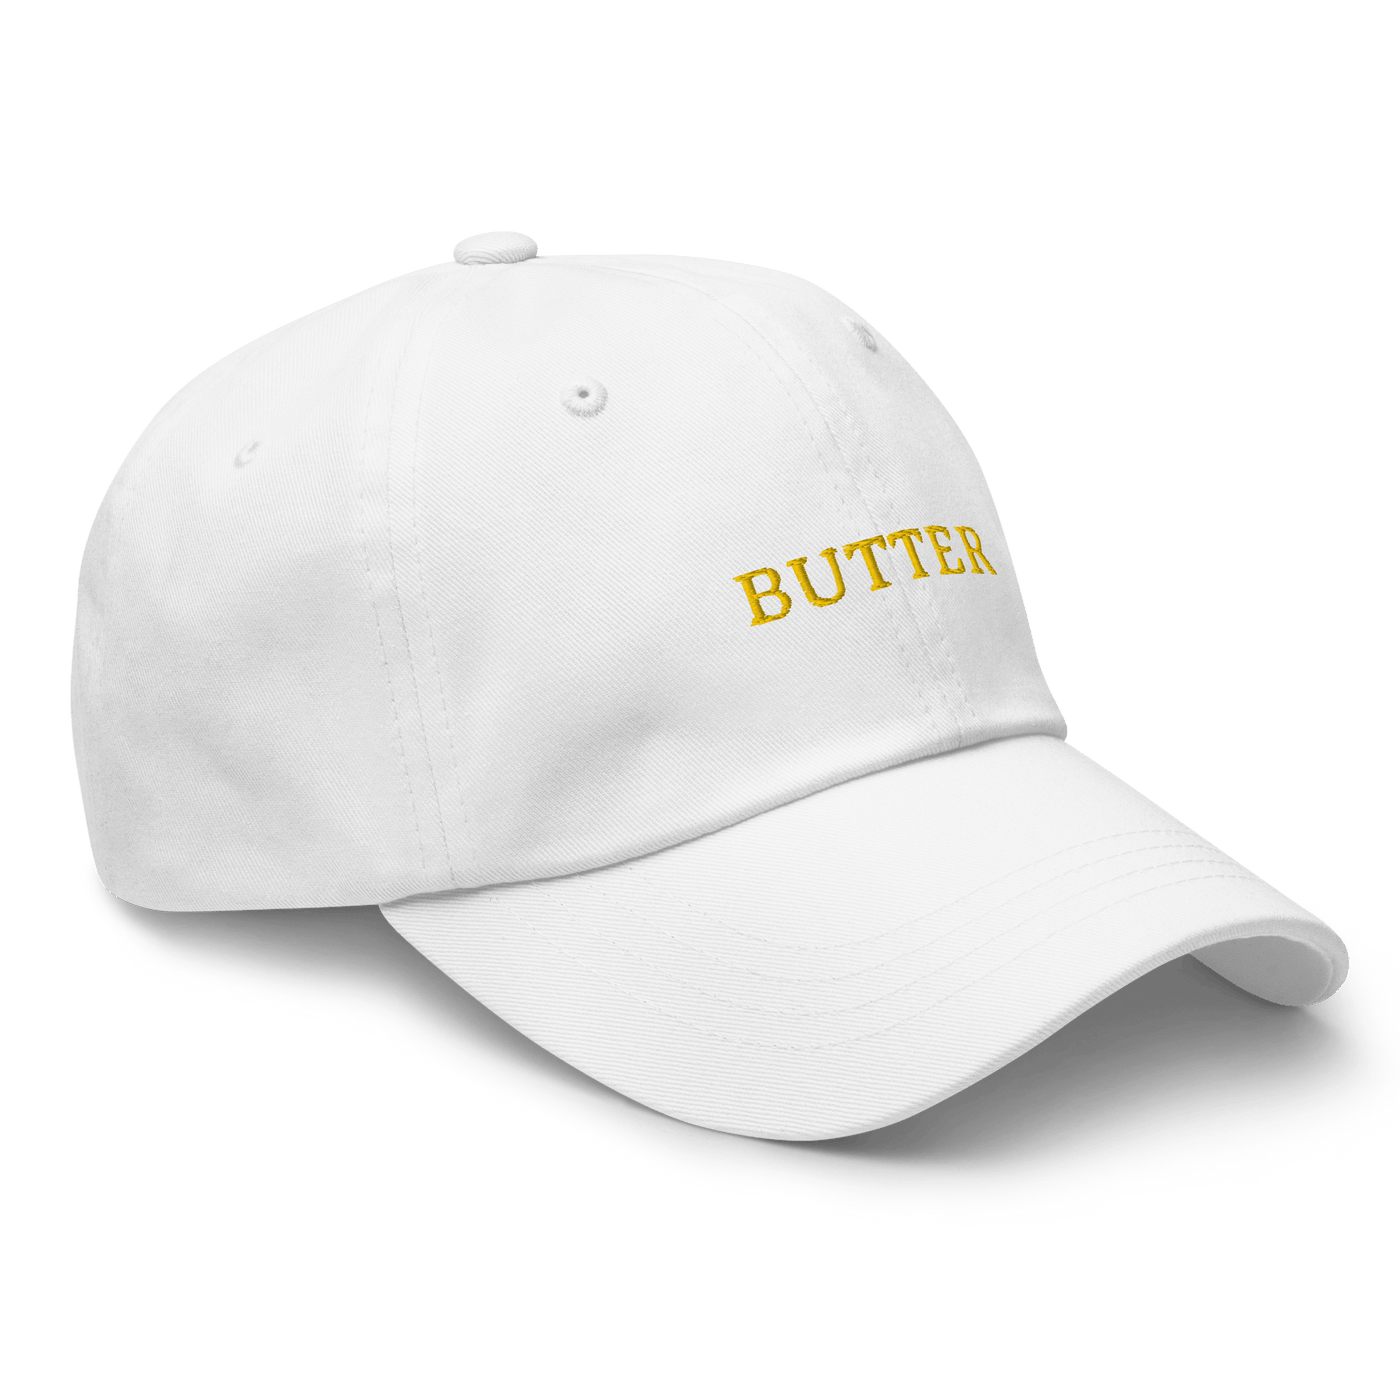 Butter Dad hat - White - - Just Another Cap Store